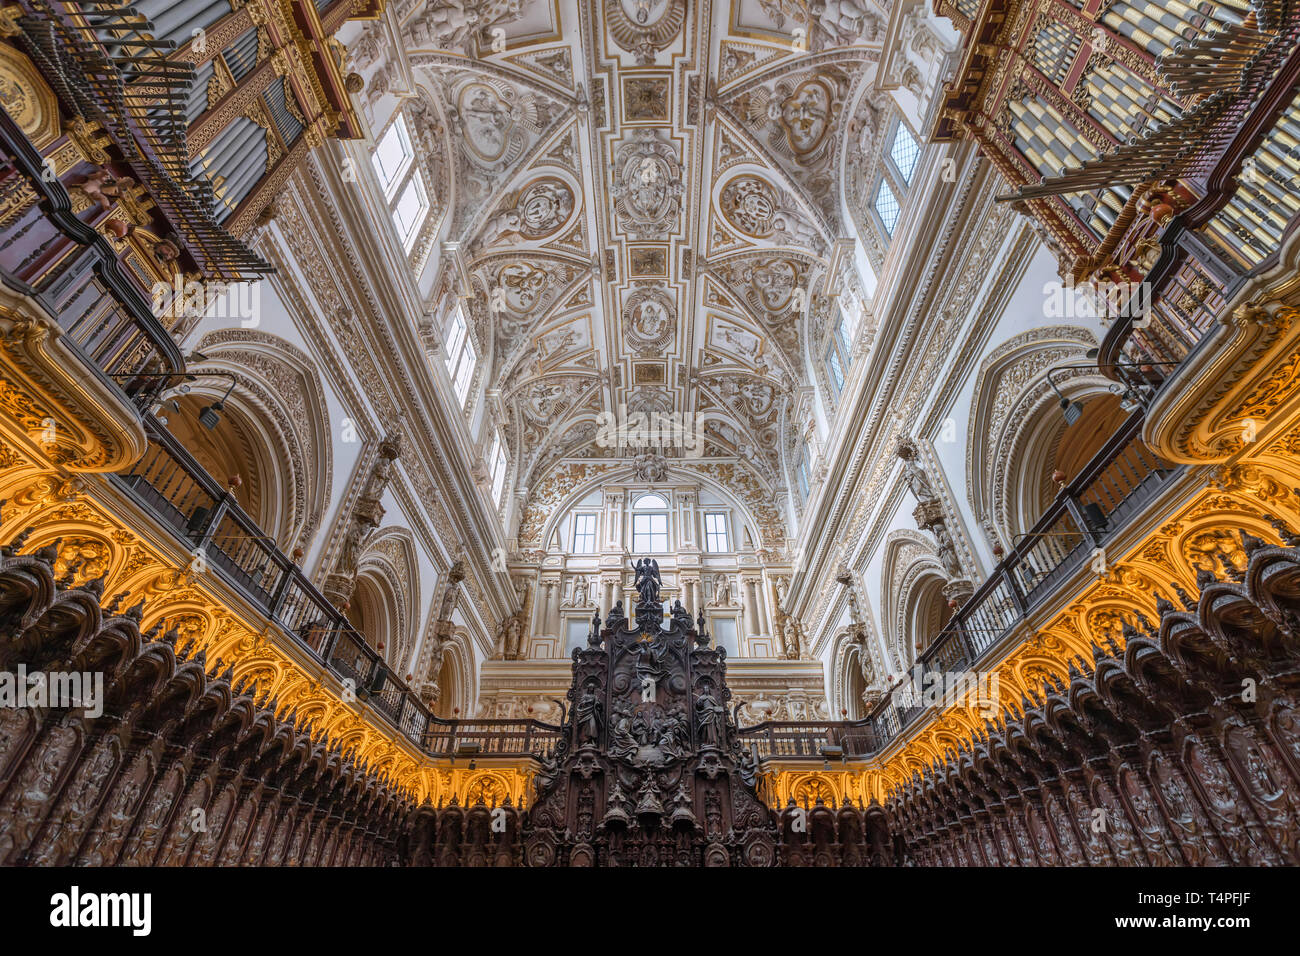 Mahogany choir stalls and lunette vault in the Santa Iglesia Cathedral (La Mezquita) in Cordoba. Stock Photo